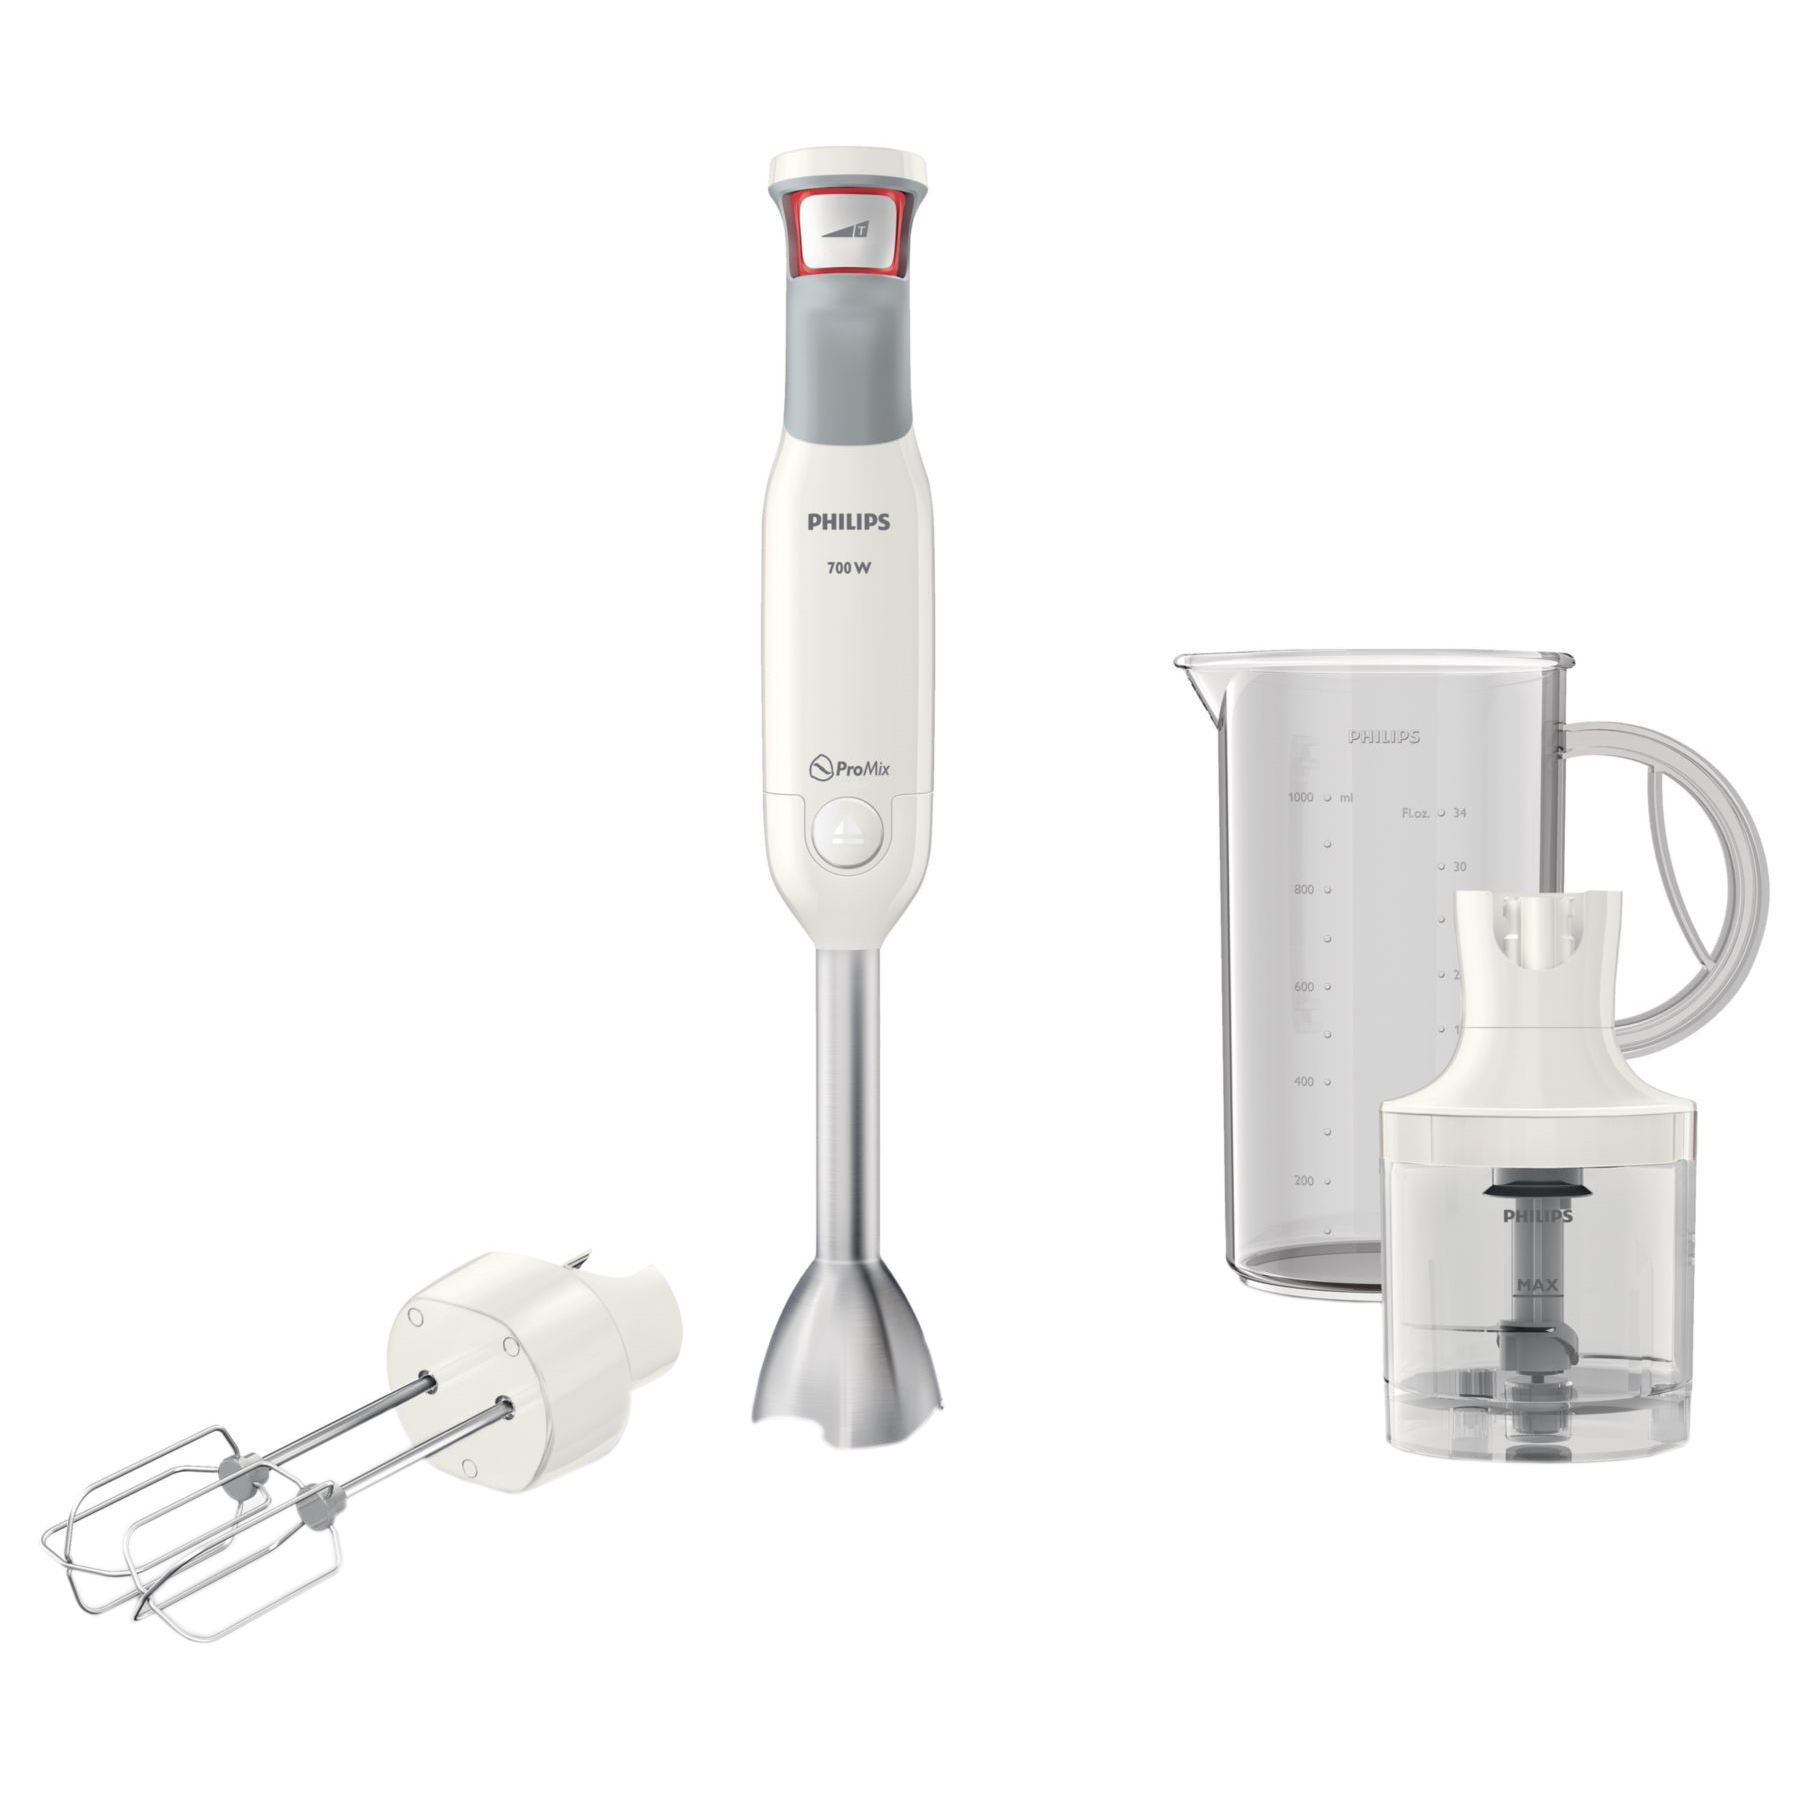  Mixer vertical Philips Avance Collection ProMix HR1646/00, 700 W, Speed Touch +Turbo, 1.2 L, Tel dublu, Alb 